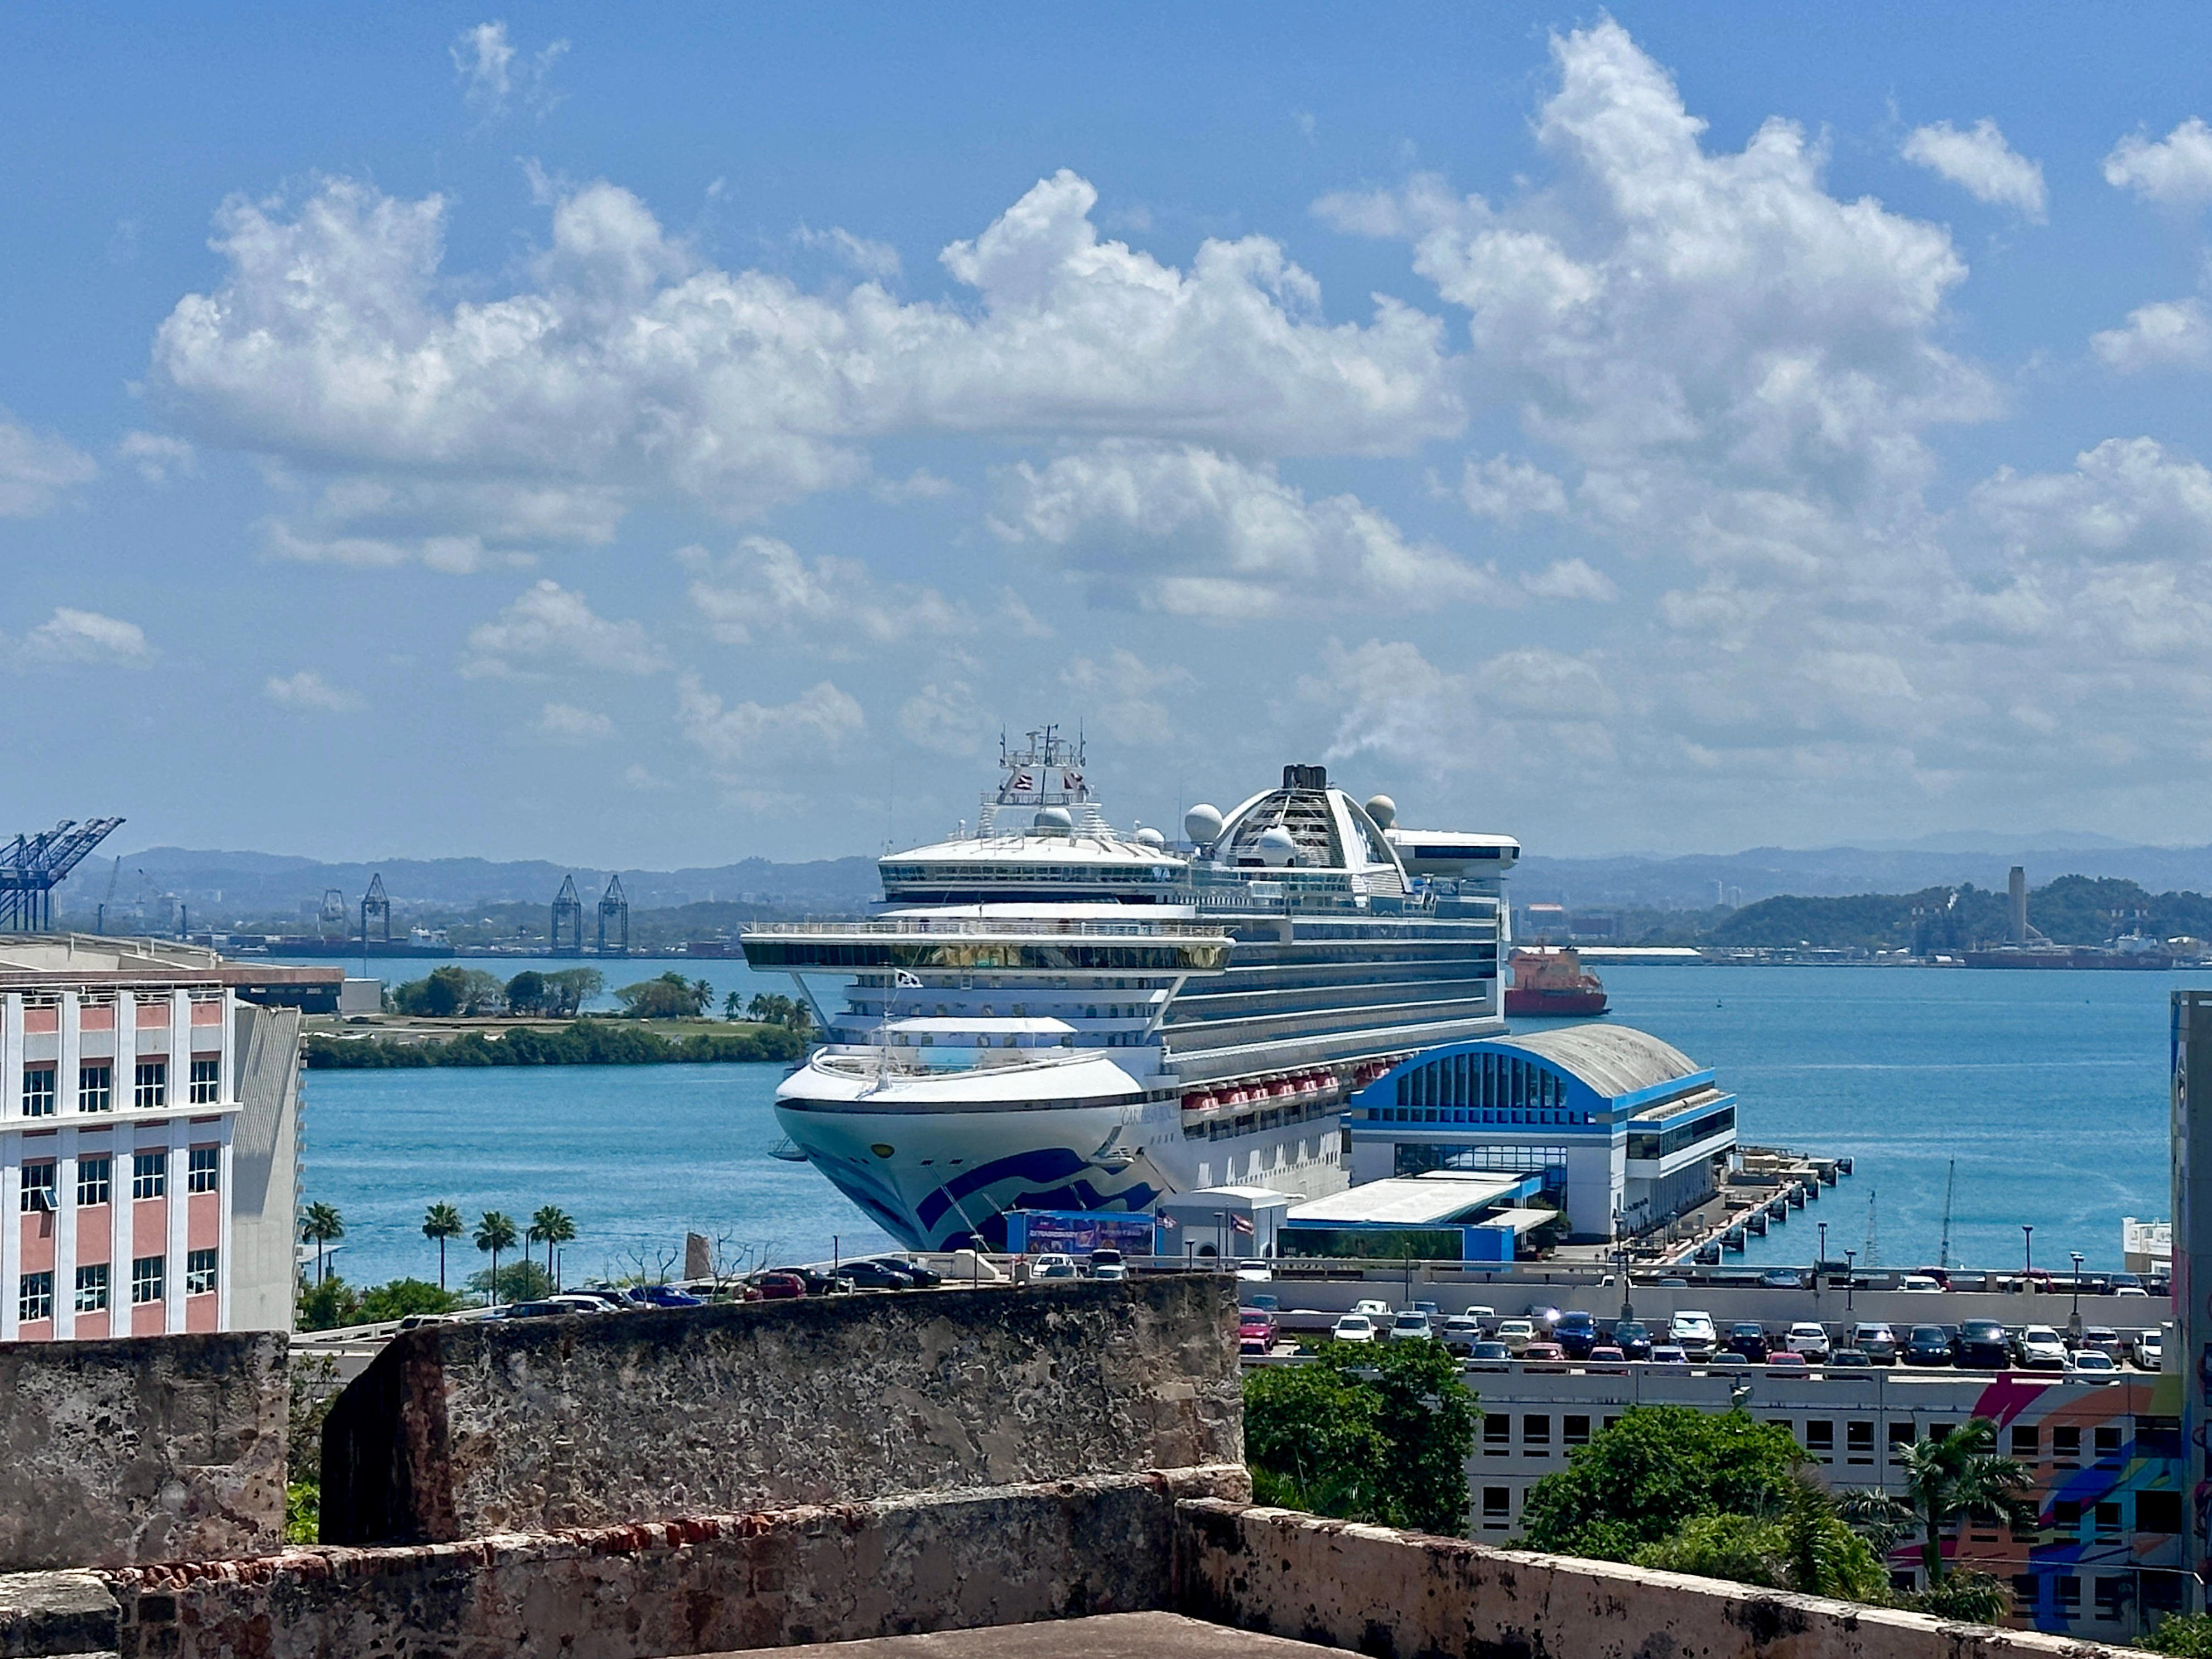 <p>It's important to <a href="https://www.businessinsider.com/virgin-voyages-things-to-know-before-booking-from-frequent-cruiser-2024-1">choose a cruise line that fits your travel personality</a>.</p><p>Since my family knows me and my son are introverts, we choose cruise ships that attract a more calm clientele and offer a more elevated experience.</p><p><span>I've sailed with a few lines, but my family often chooses </span><a href="https://www.businessinsider.com/reasons-princess-cruises-best-to-book-from-frequent-cruiser-2023-9"><span>Princess Cruises</span></a><span> because its ships are a bit calmer and more elevated than those packed with water slides and rock-climbing walls. </span></p><p><span>Plus, the more attractions and activities a ship offers, the more likely the people on it are seeking a louder, wilder time. </span></p>